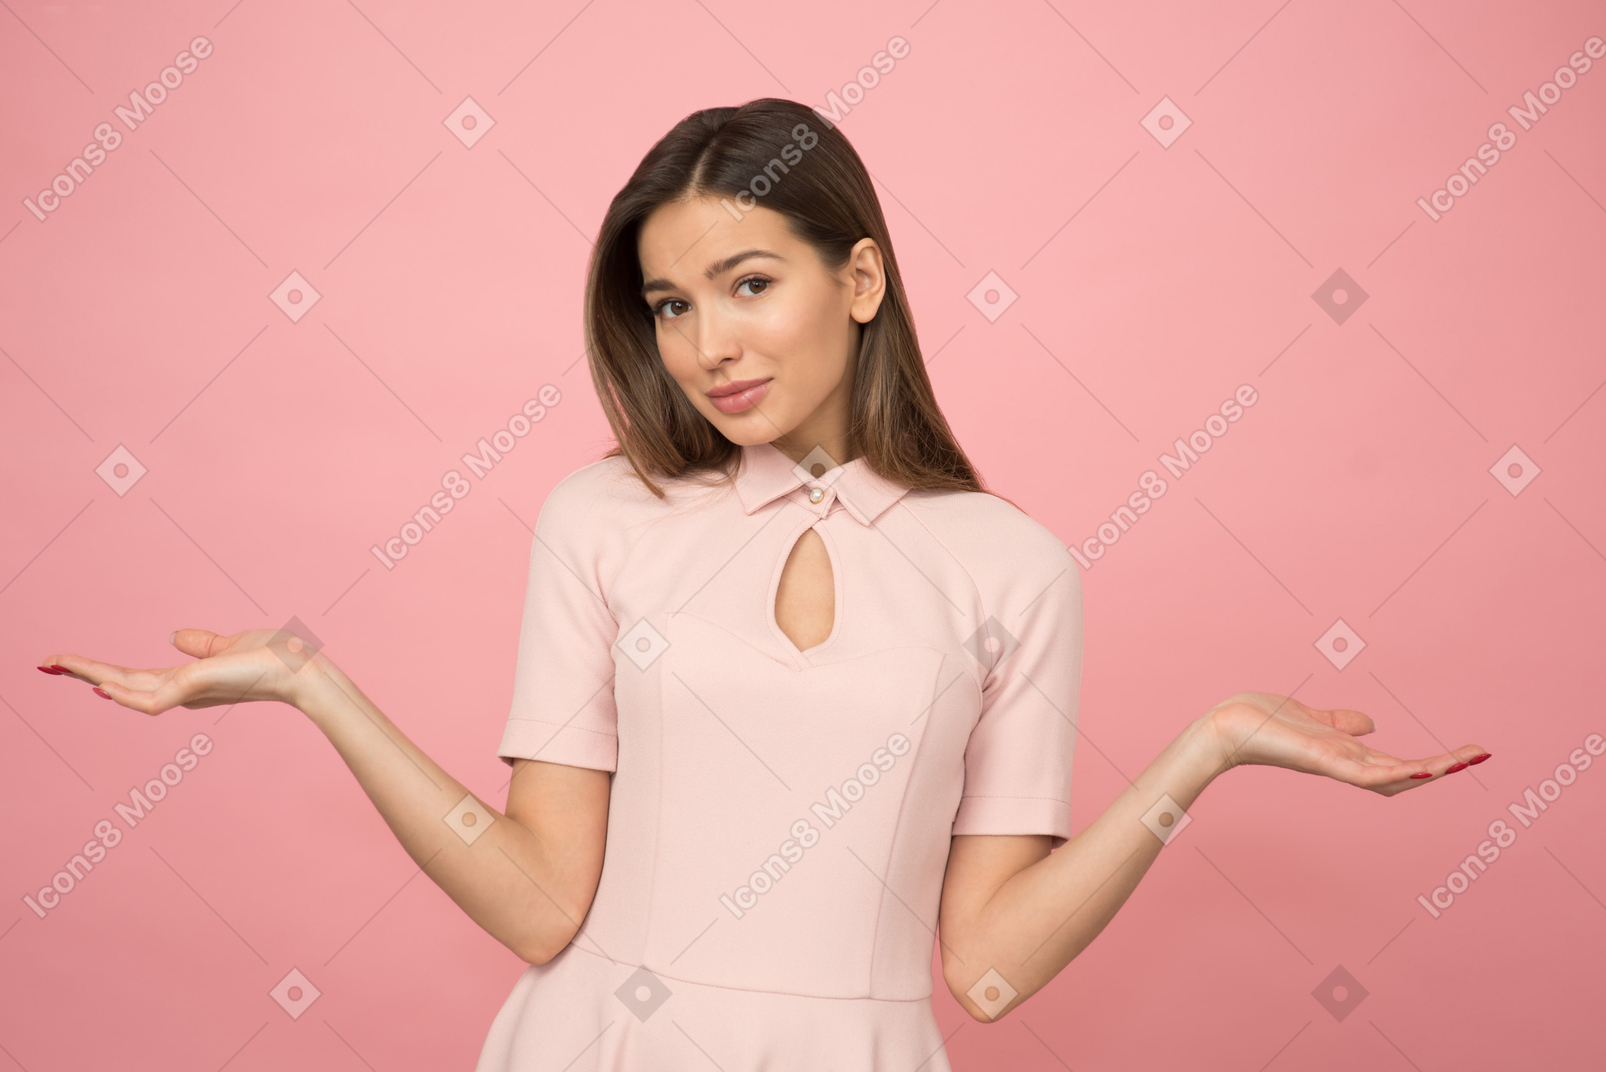 Girl posing holding her arms open